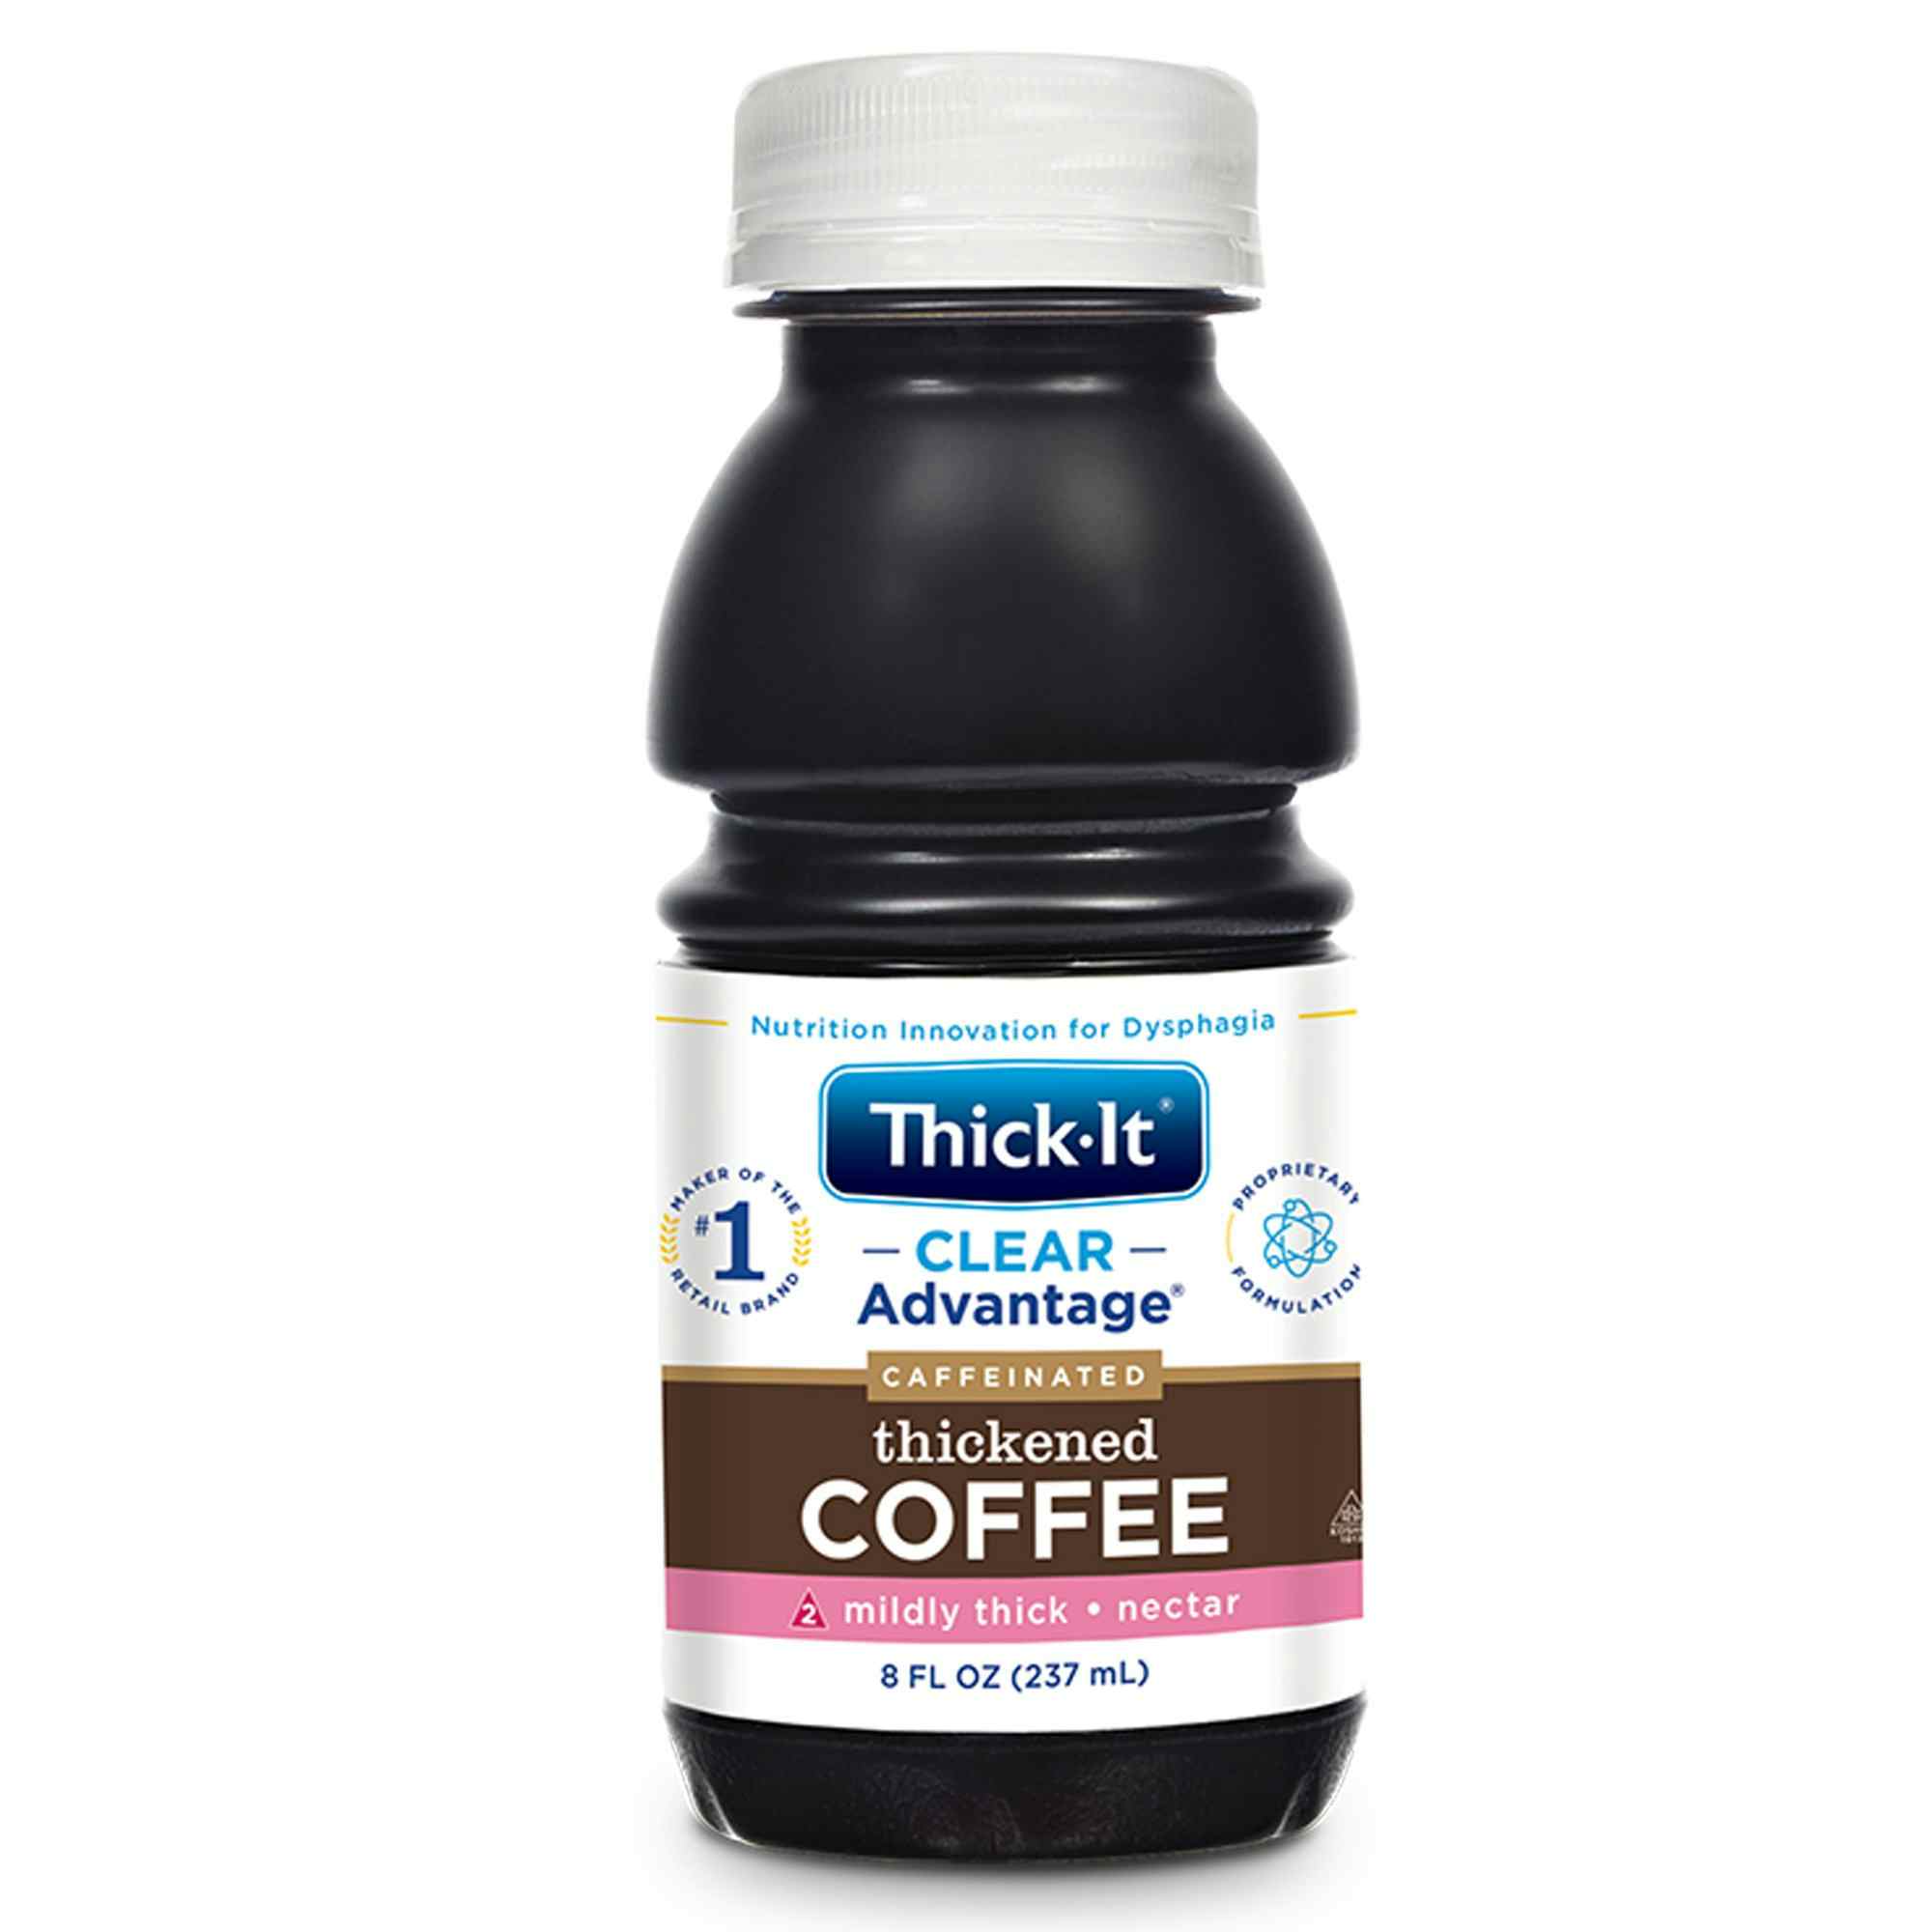 Thick-It Clear Advantage Caffeinated Thickened Coffee, Mildly Thick, Nectar Consistency, B467-L9044, 1 Each